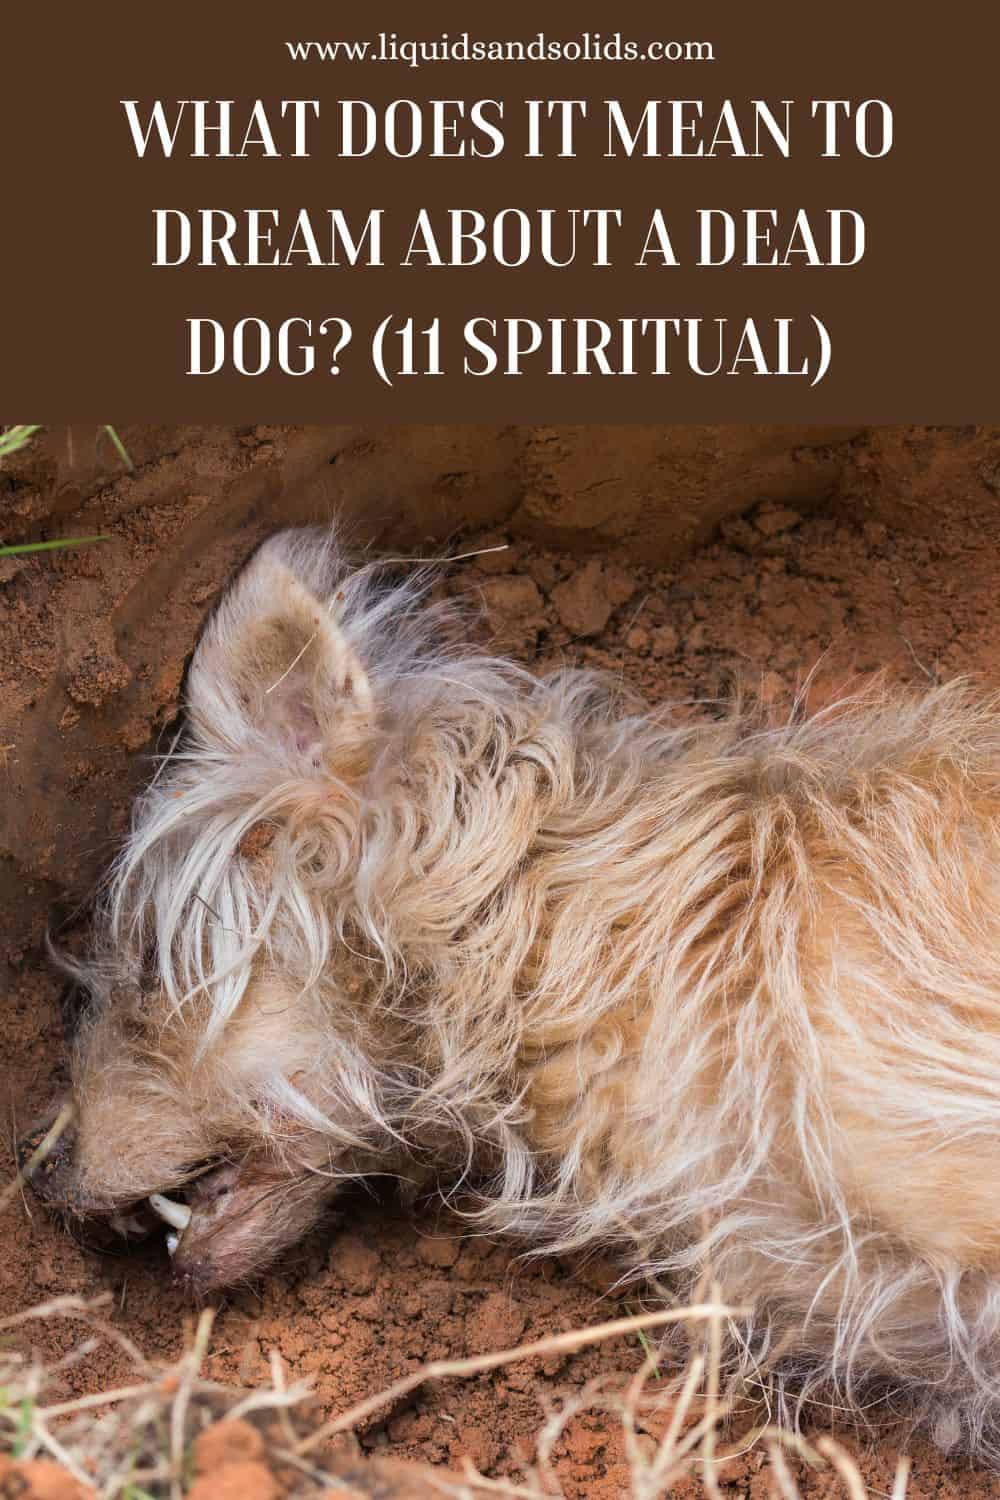 What Does It Mean To Dream about A Dead Dog? (11 Spiritual)